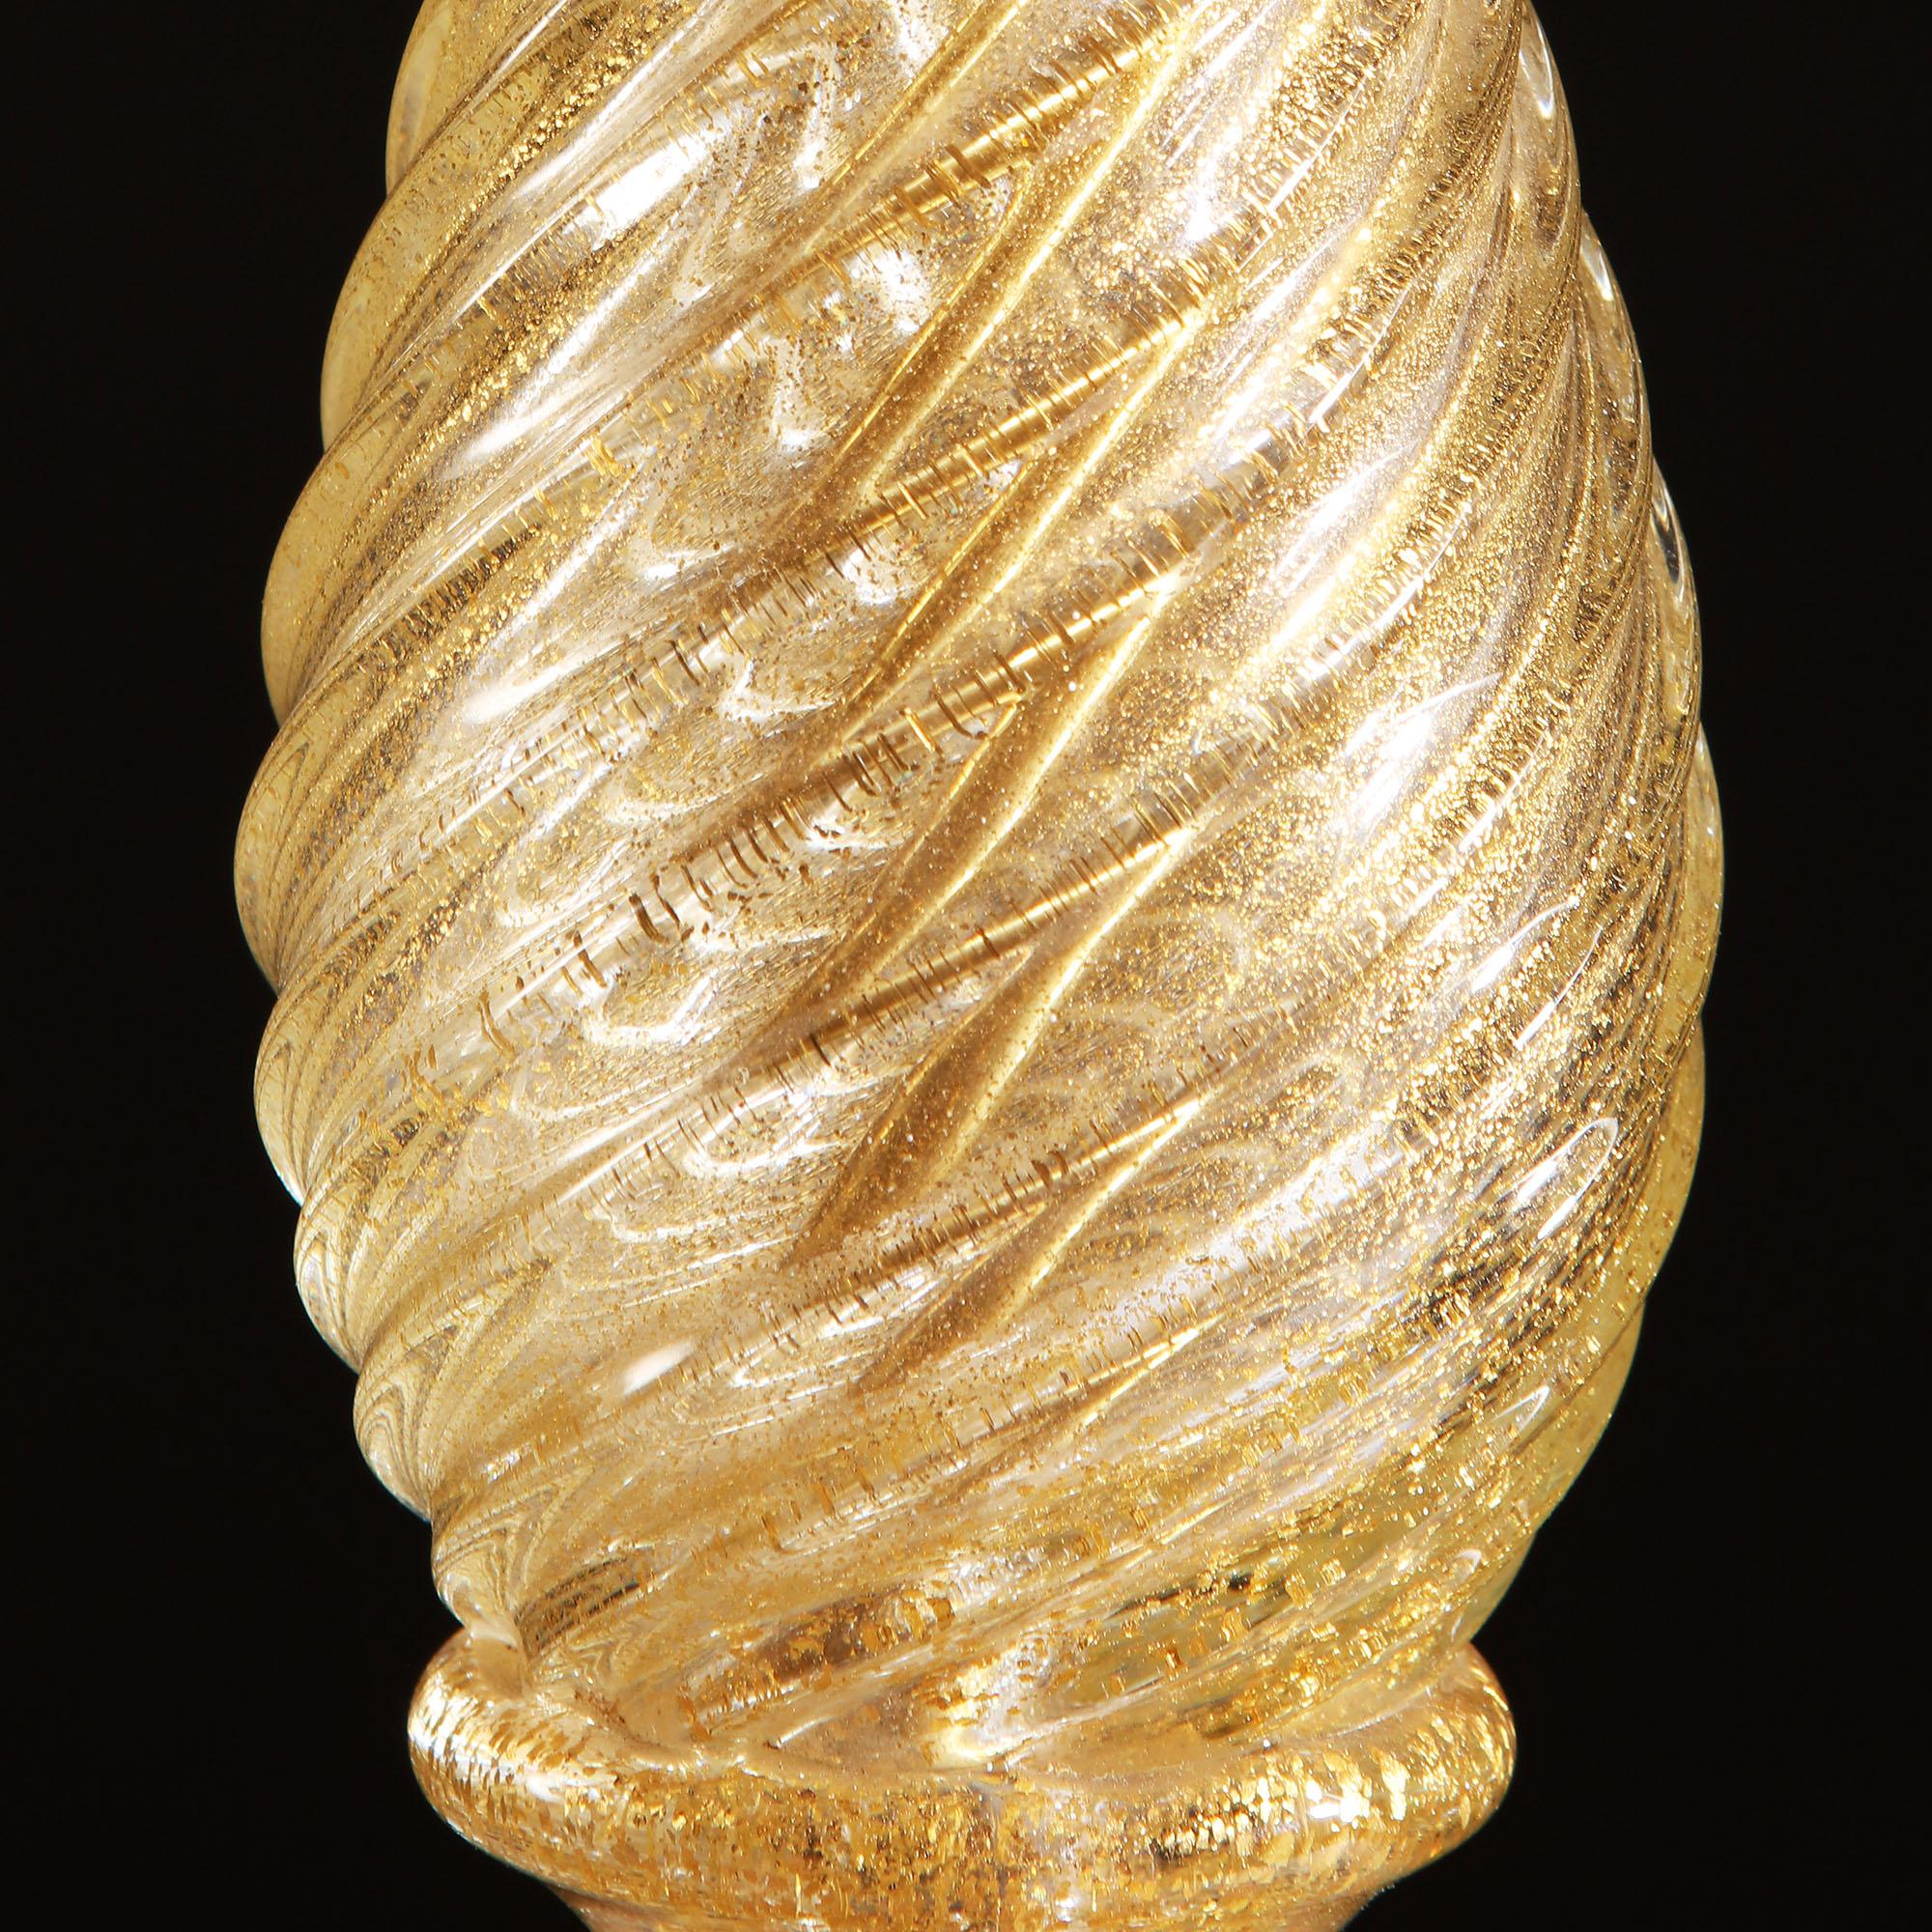 A fine Murano glass lamp of double gourd form and with twisted stem, the glass blown using the Pulegoso technique and with gold flecks. The Pulegoso process traps tiny air bubbles within the glass giving off a frosty appearance.

Barovier comes